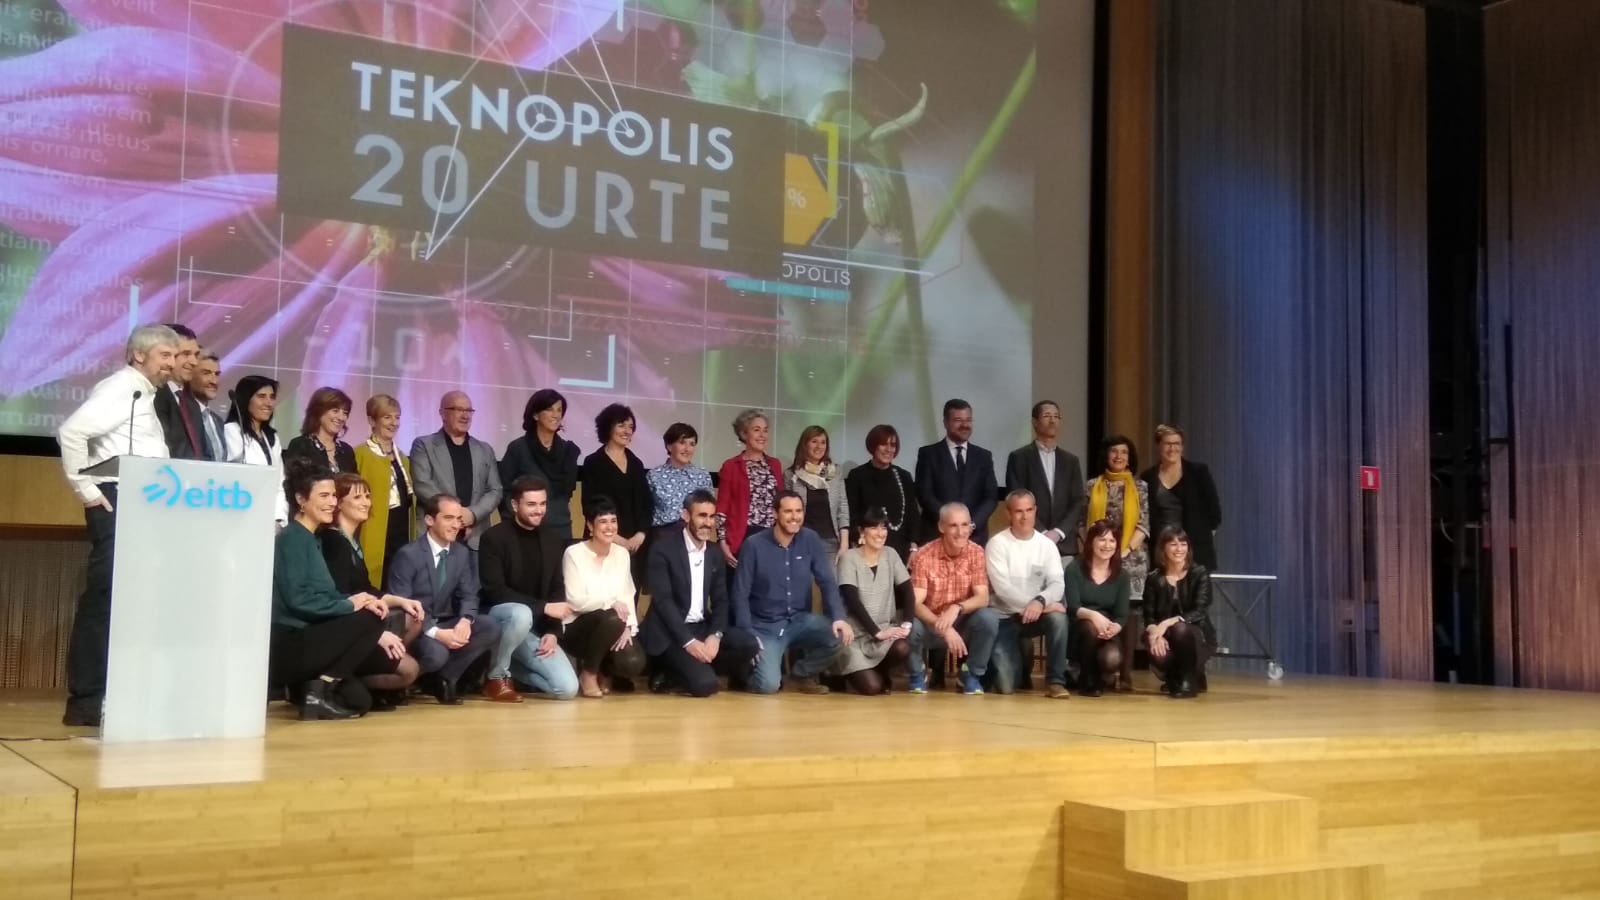 Mario Pérez, executive director of ESS Bilbao, was awarded the Wolfram Prize at the Gala held yesterday at the EITB headquarters in Bilbao to mark the 20th anniversary of the scientific dissemination program Teknopolis